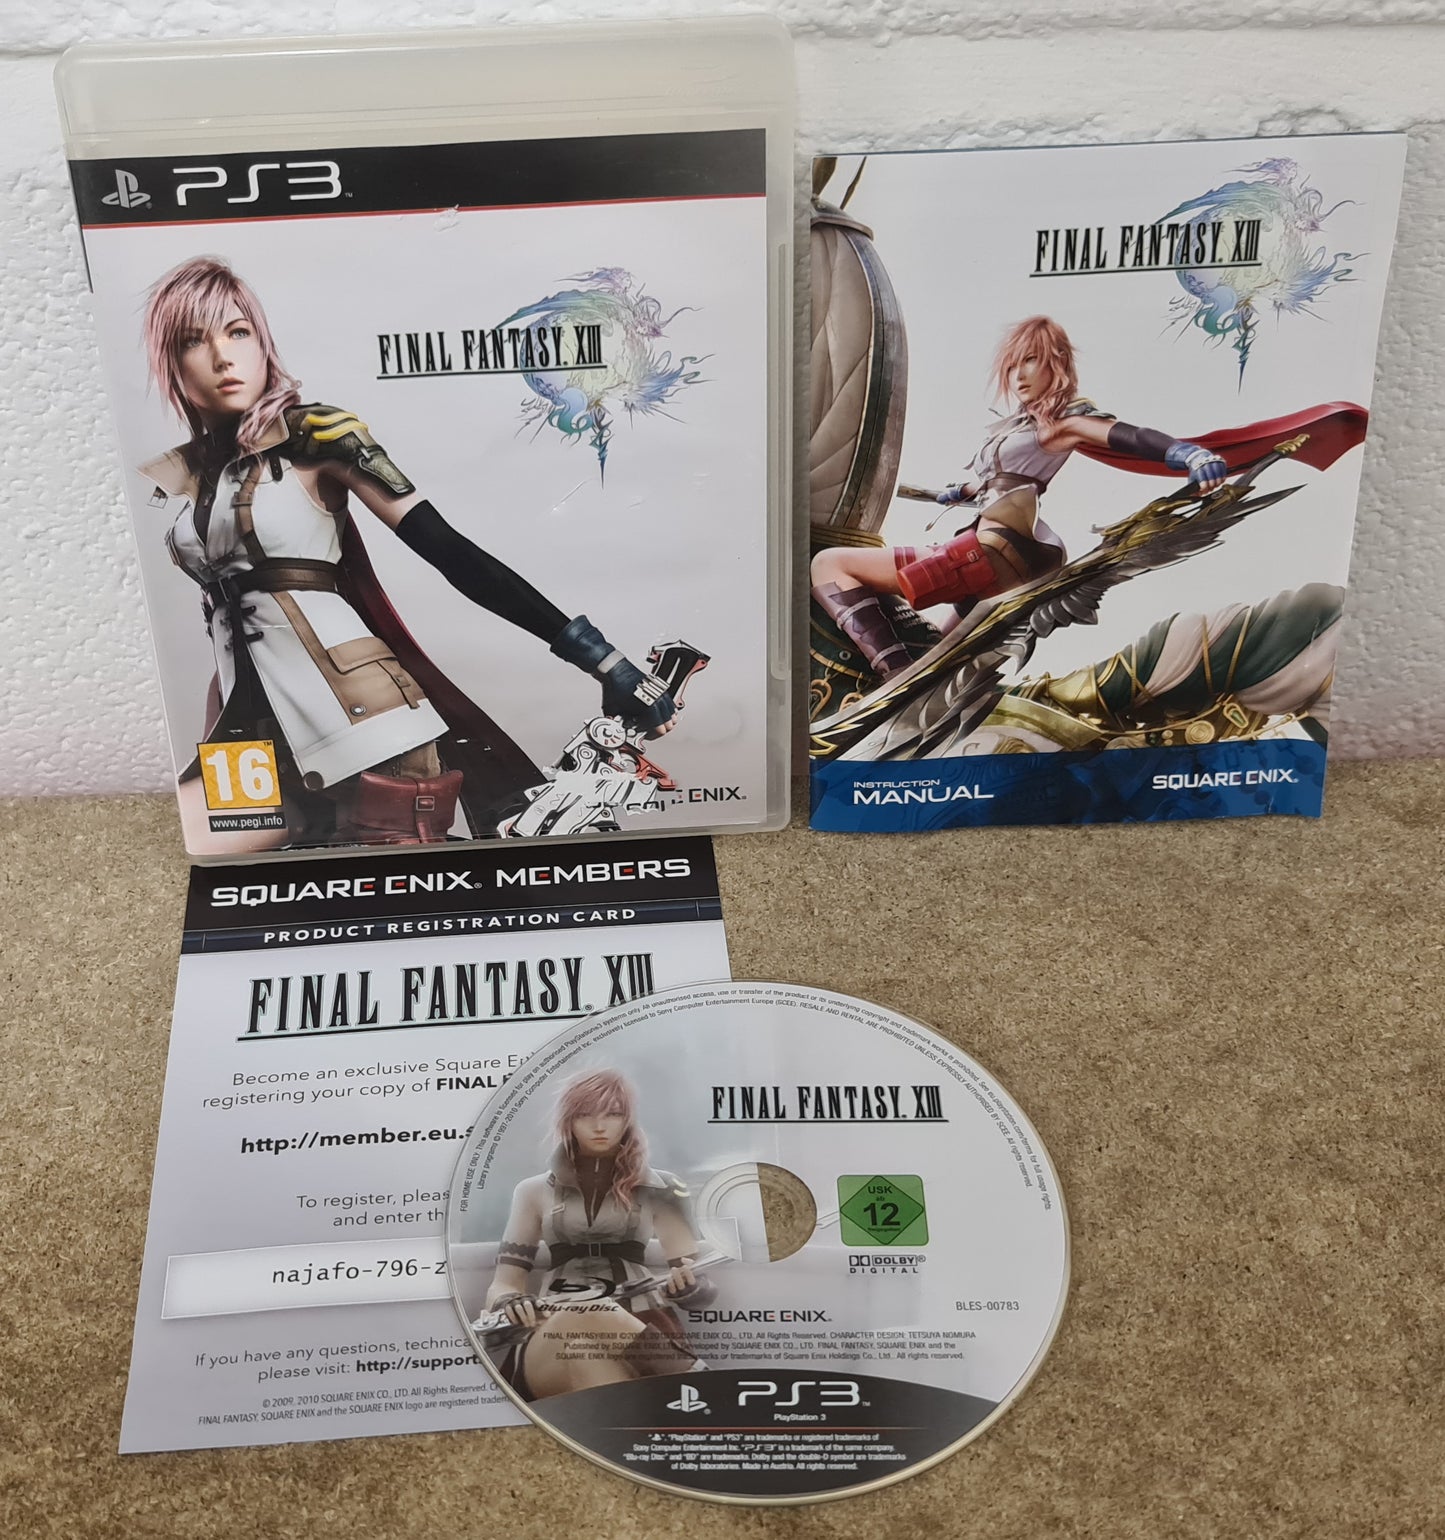 Final Fantasy XIII Sony Playstation 3 (PS3) Game